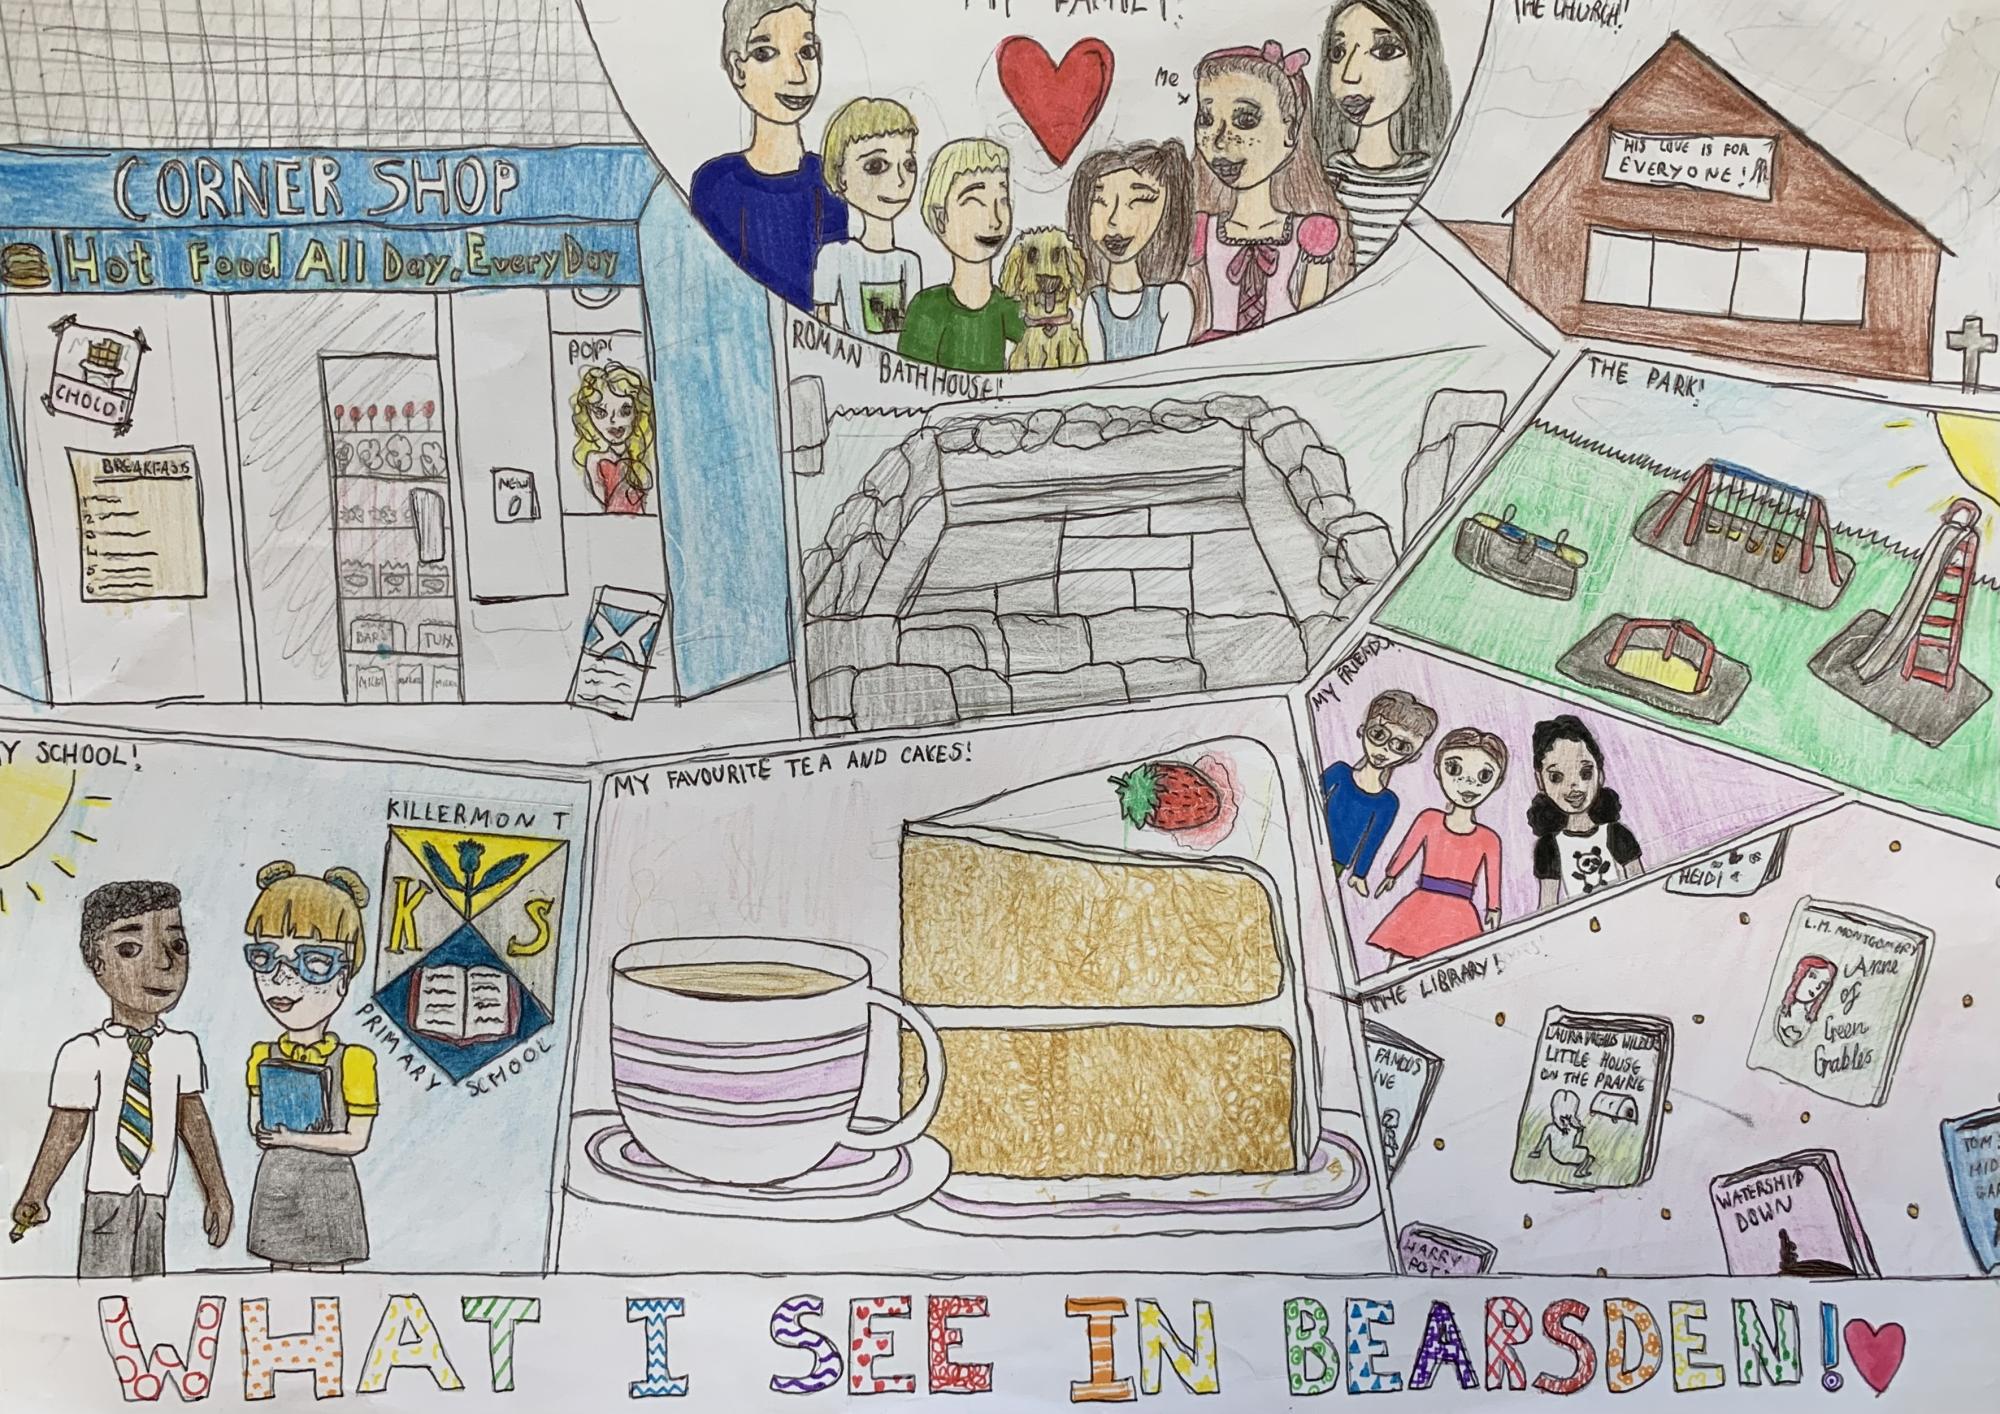 Daisy Matheson - P7 at Killermont Primary - entry for 'What I See in Bearsden' primary schools competition